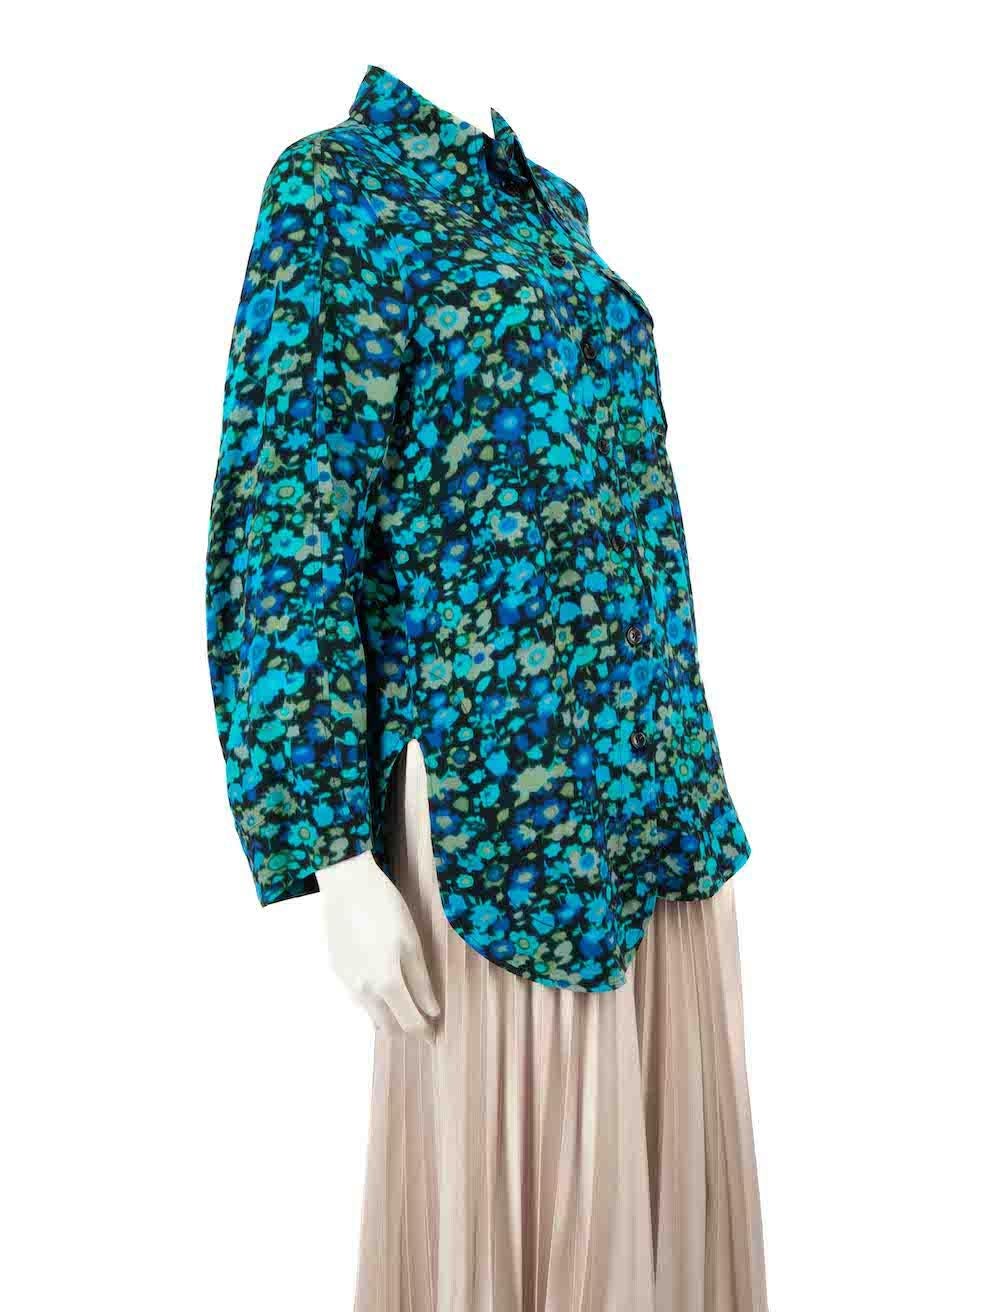 CONDITION is Very good. Hardly any visible wear to shirt is evident on this used Ganni designer resale item.
 
 Details
 Blue
 Viscose
 Shirt
 Floral pattern
 Long sleeves
 Button up fastening
 Asymmetric button placket
 
 Made in China
 
